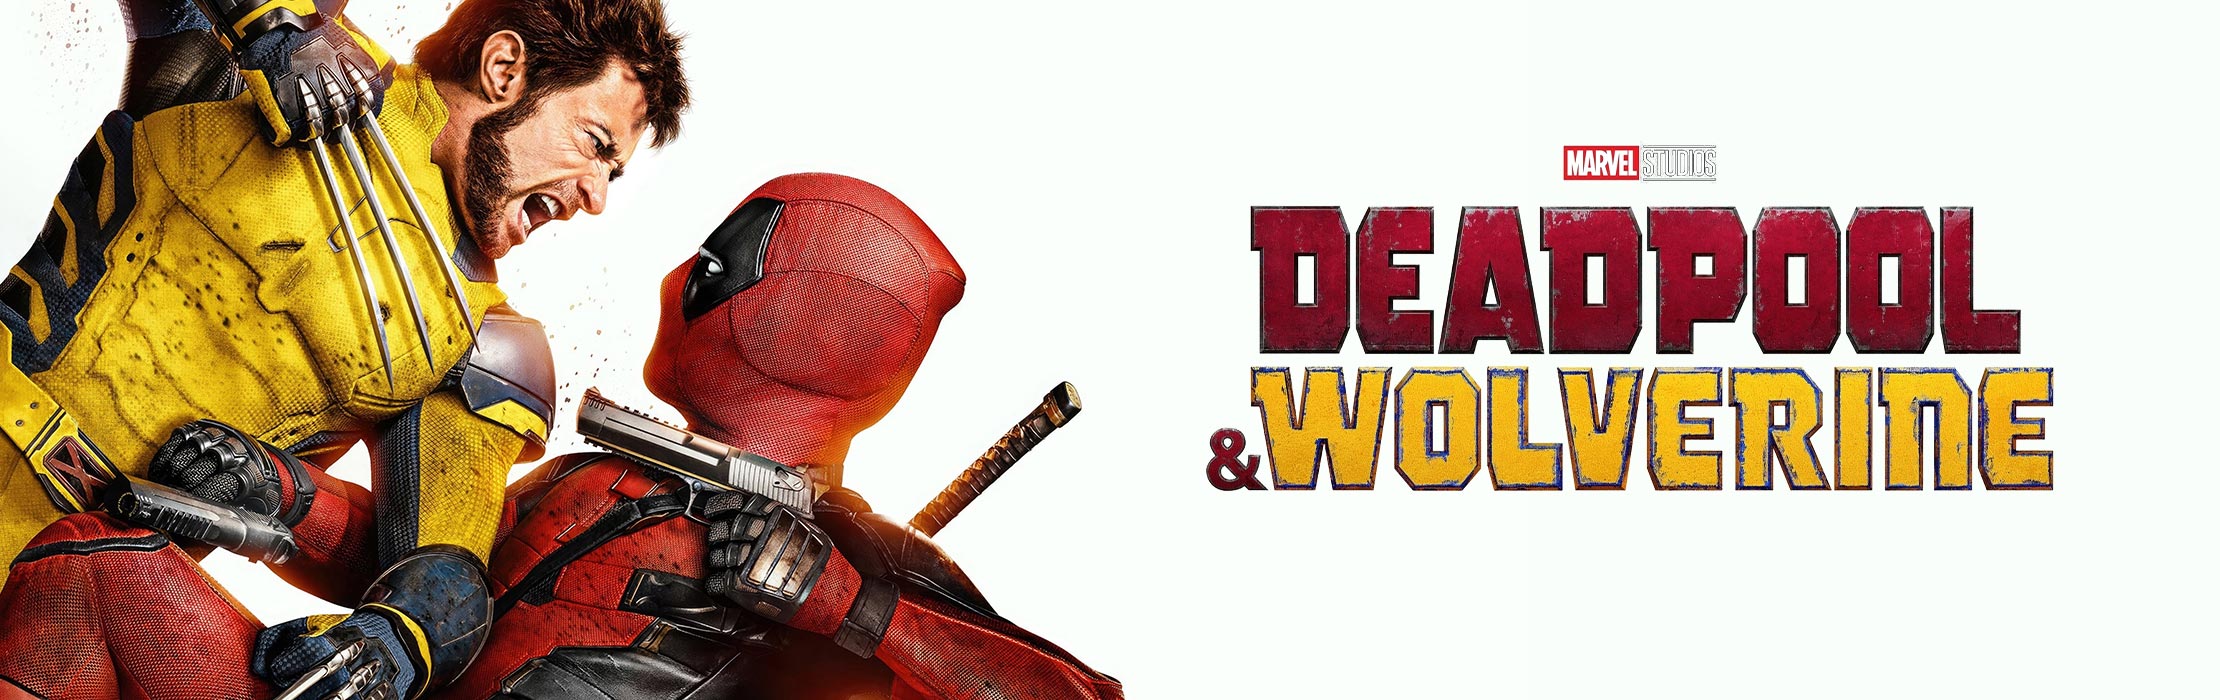 /film/Deadpool-Wolverine/babes-in-arms